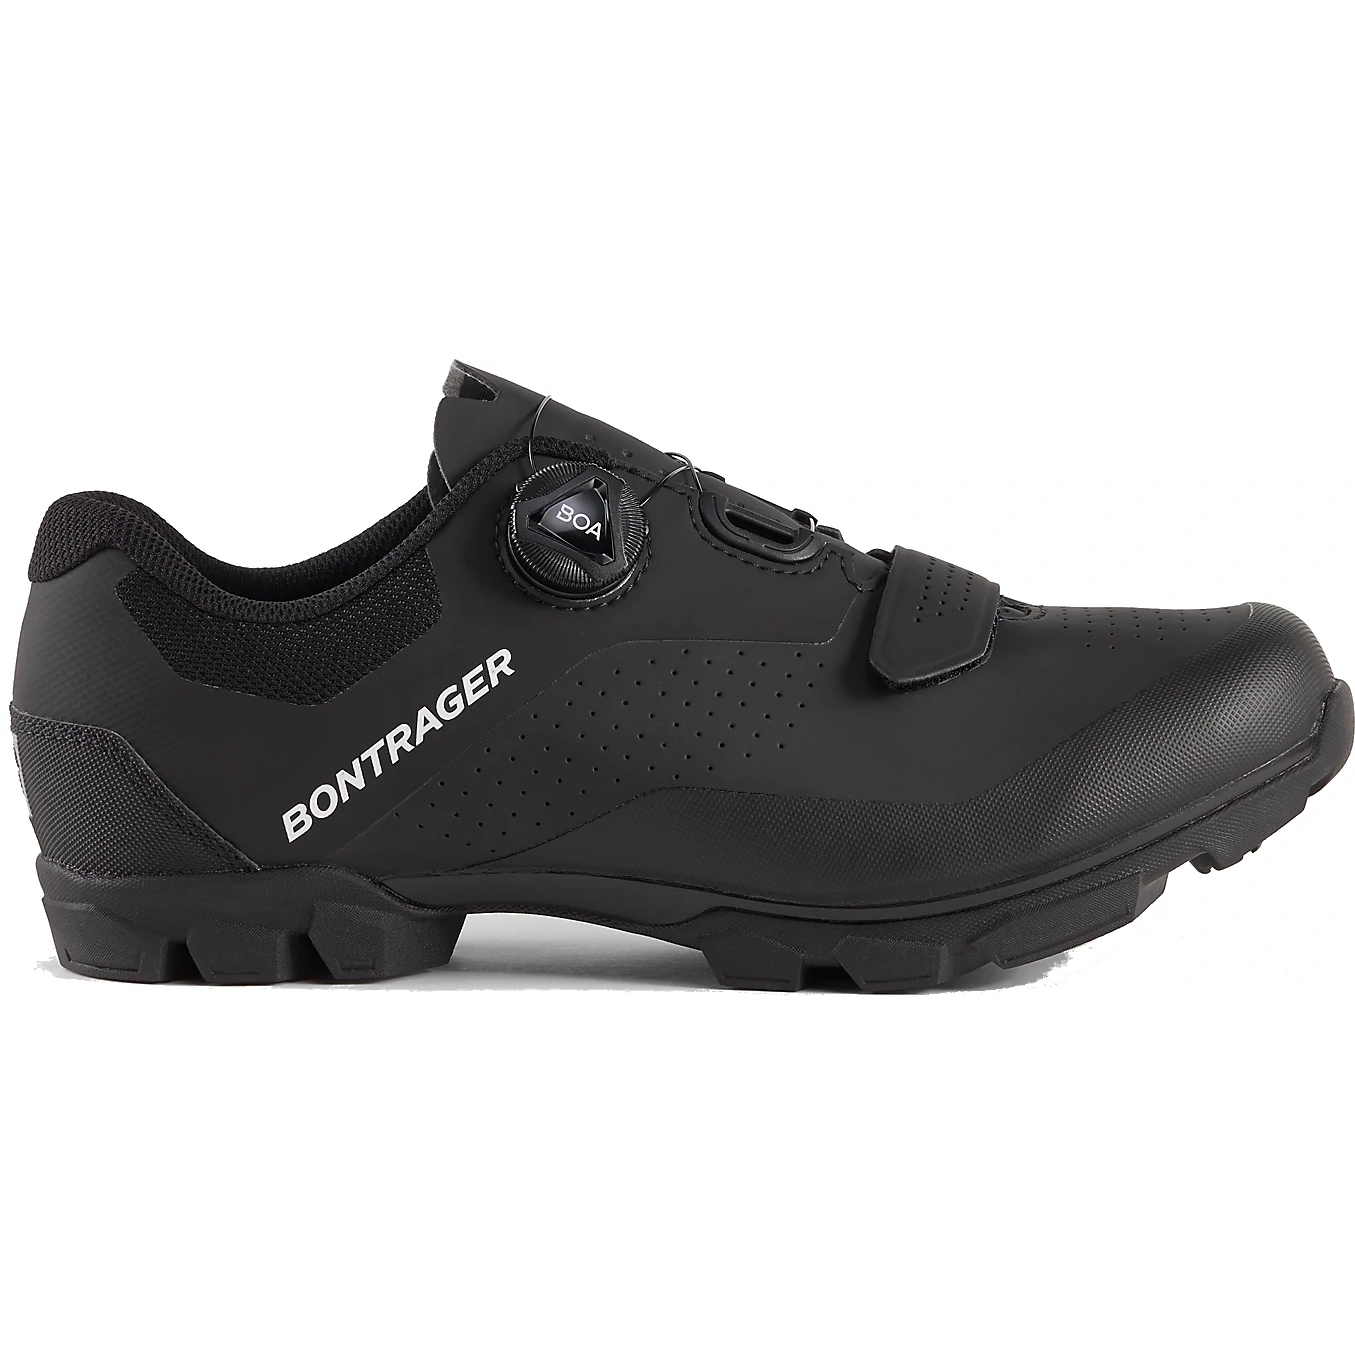 Picture of Bontrager Foray Mountainbike Shoe - black